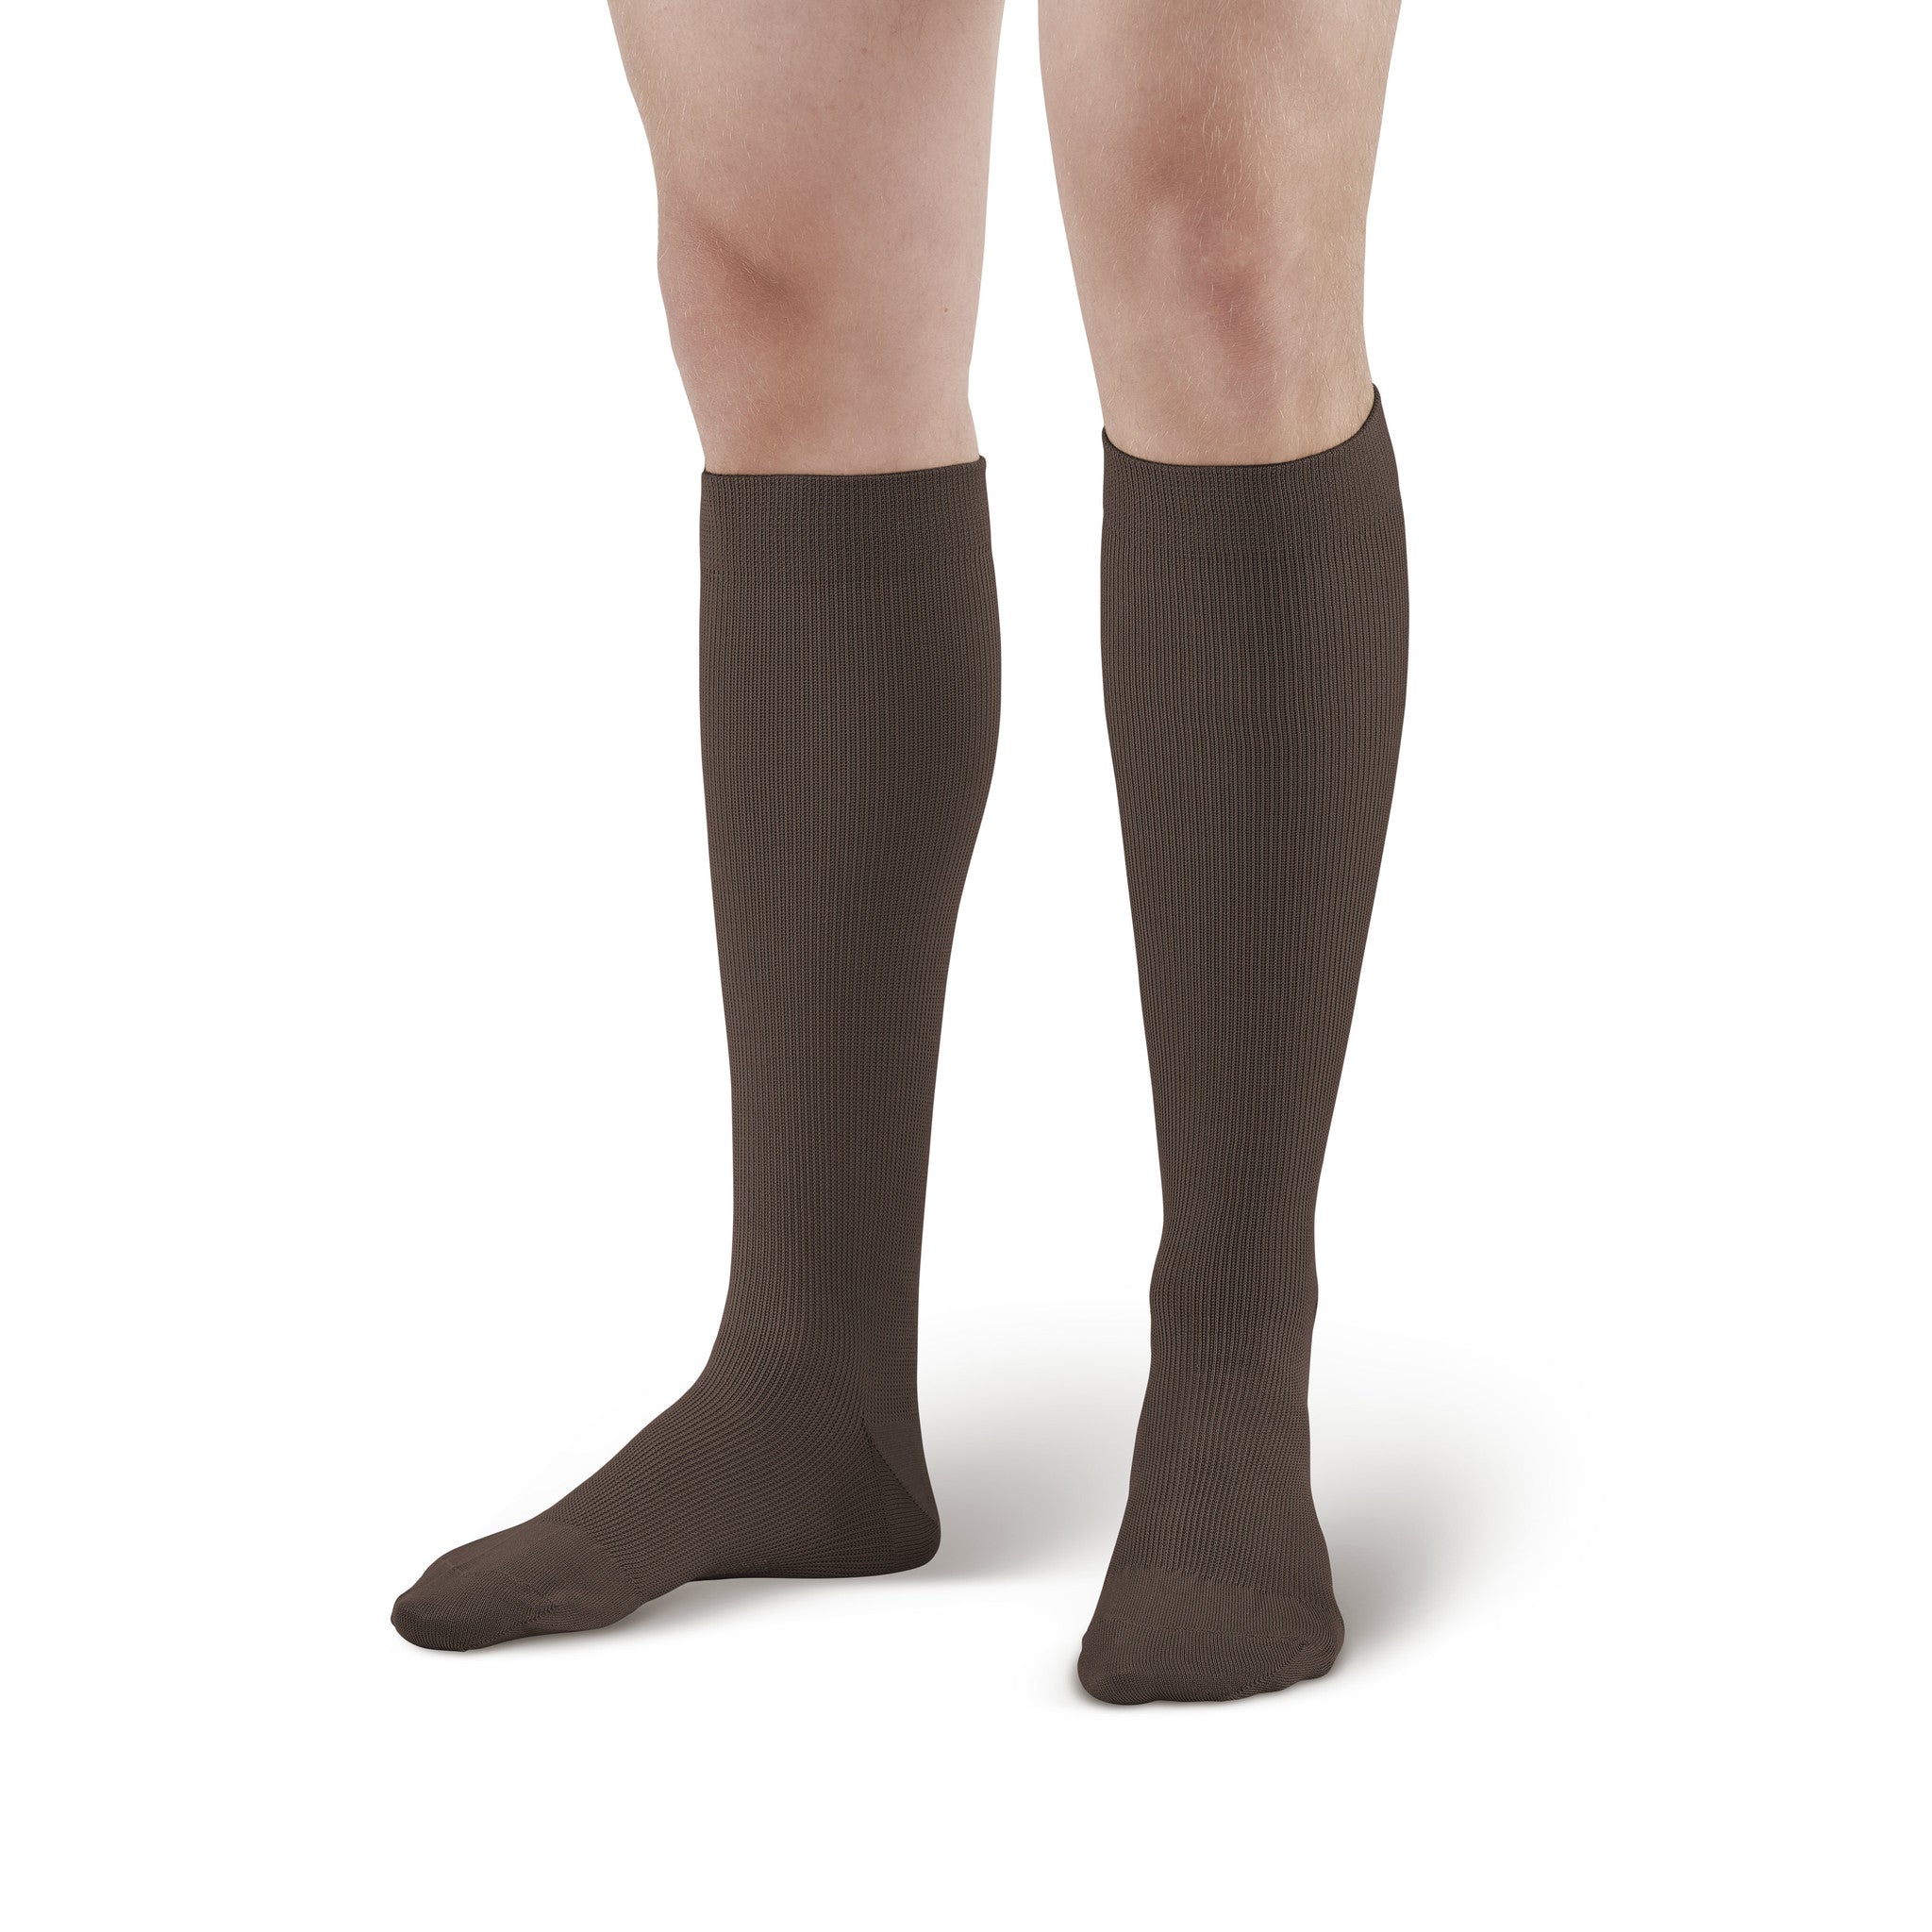 Knee-High Compression Socks Open Toe Elastic Sleeves and Stockings 1 Pair  20-30 mmHg Medical Compression Stockings Brown XXL 